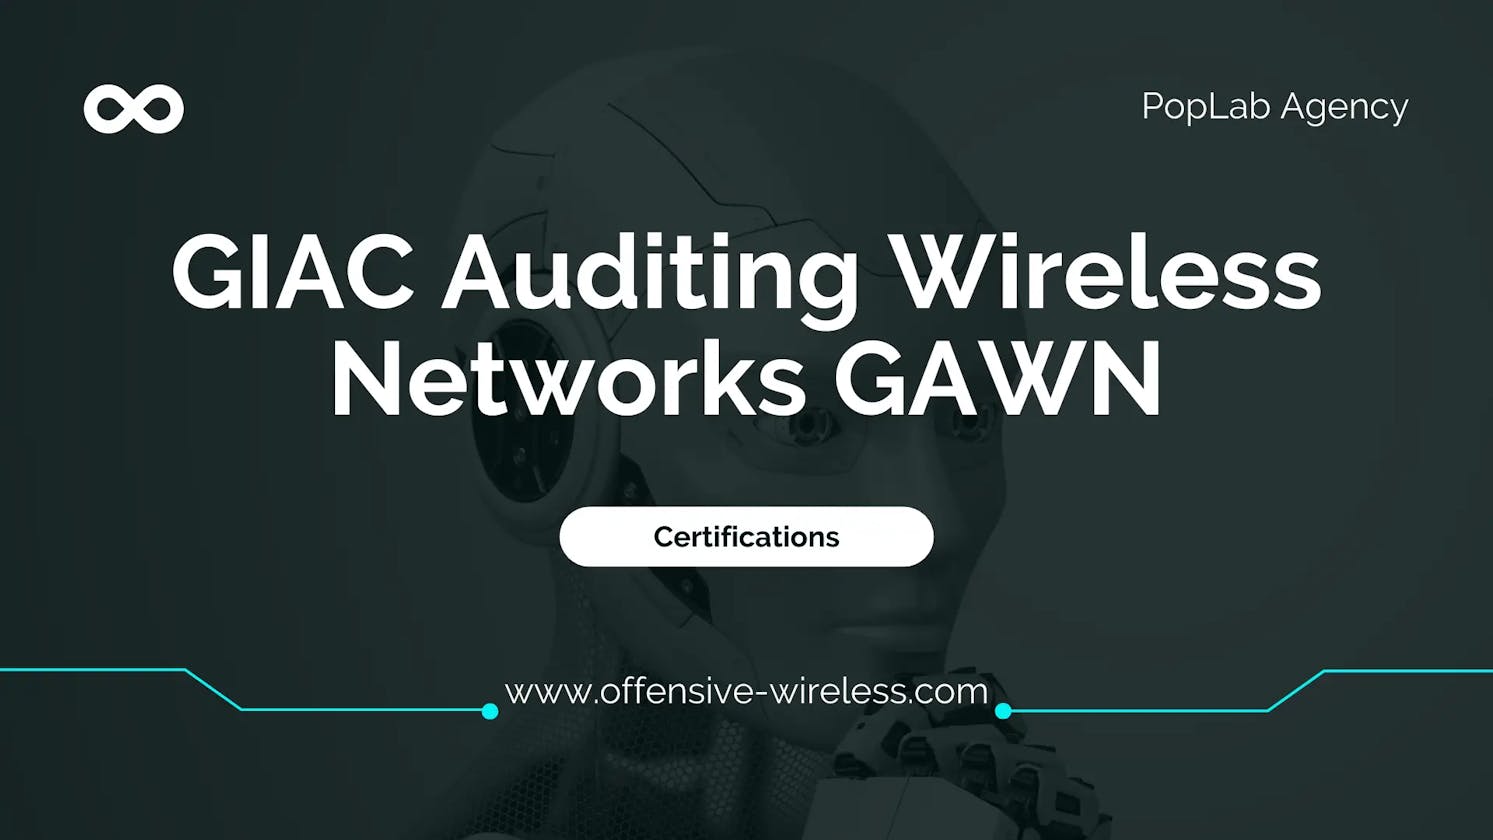 GIAC Assessing and Auditing Wireless Networks (GAWN)